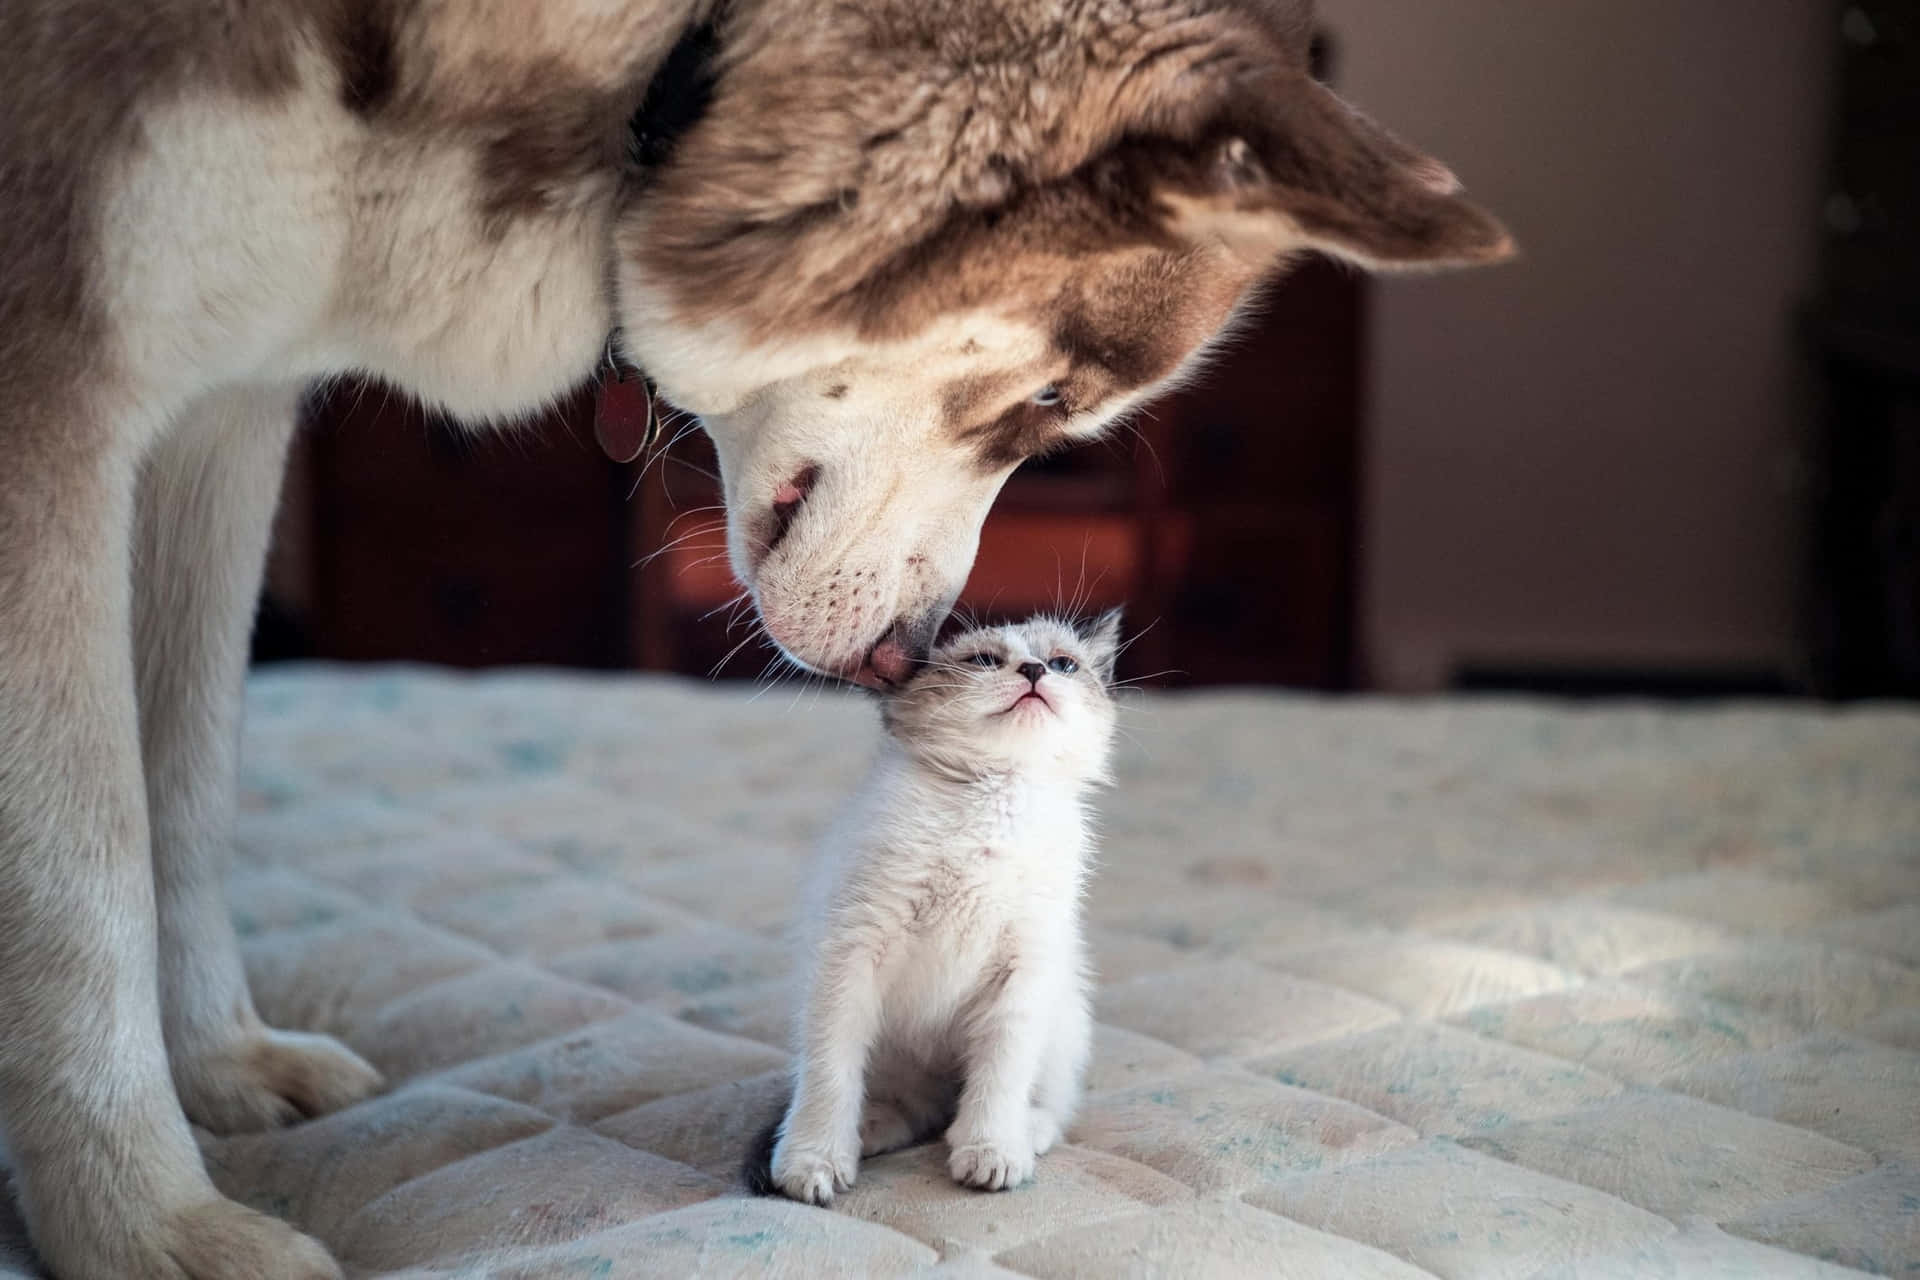 An adorable moment shared between a cat and a dog!